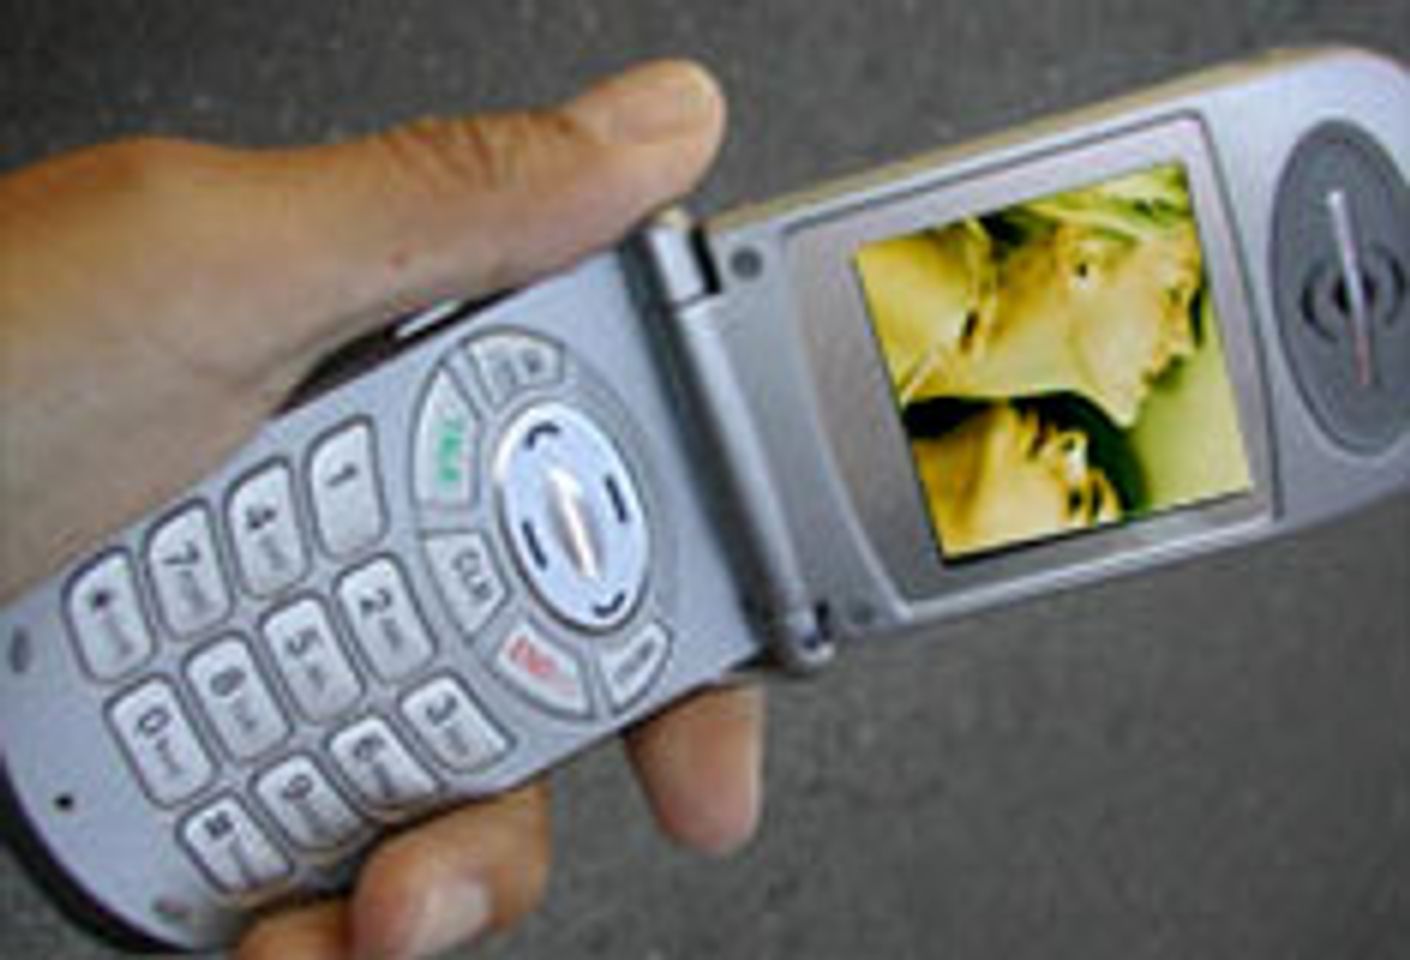 A Growing Privacy Issue: Camera Cell Phones